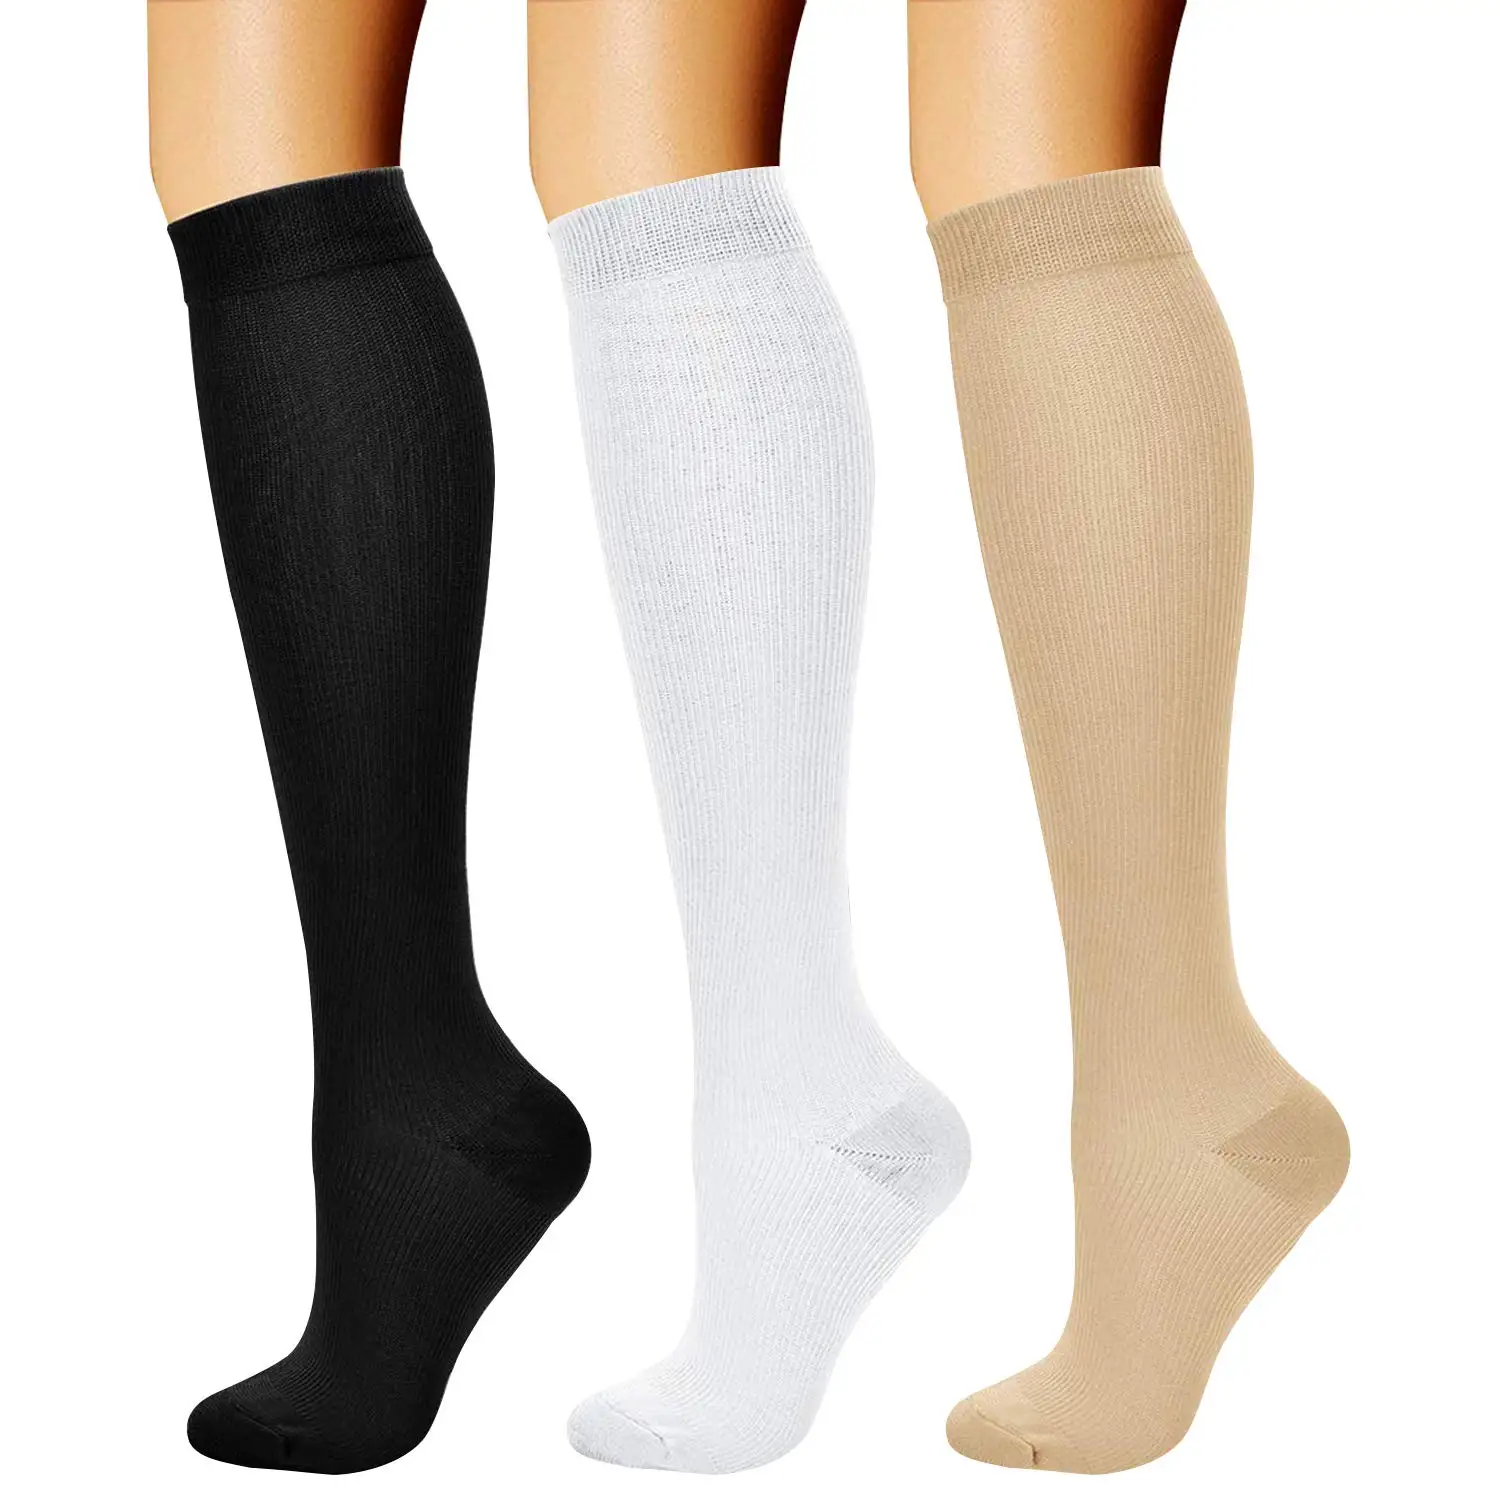 3 Pairs Plus Size Compression Stocking for Women Men All Day Wear Knee High Calf Nurse Medical Circulation Support Socks